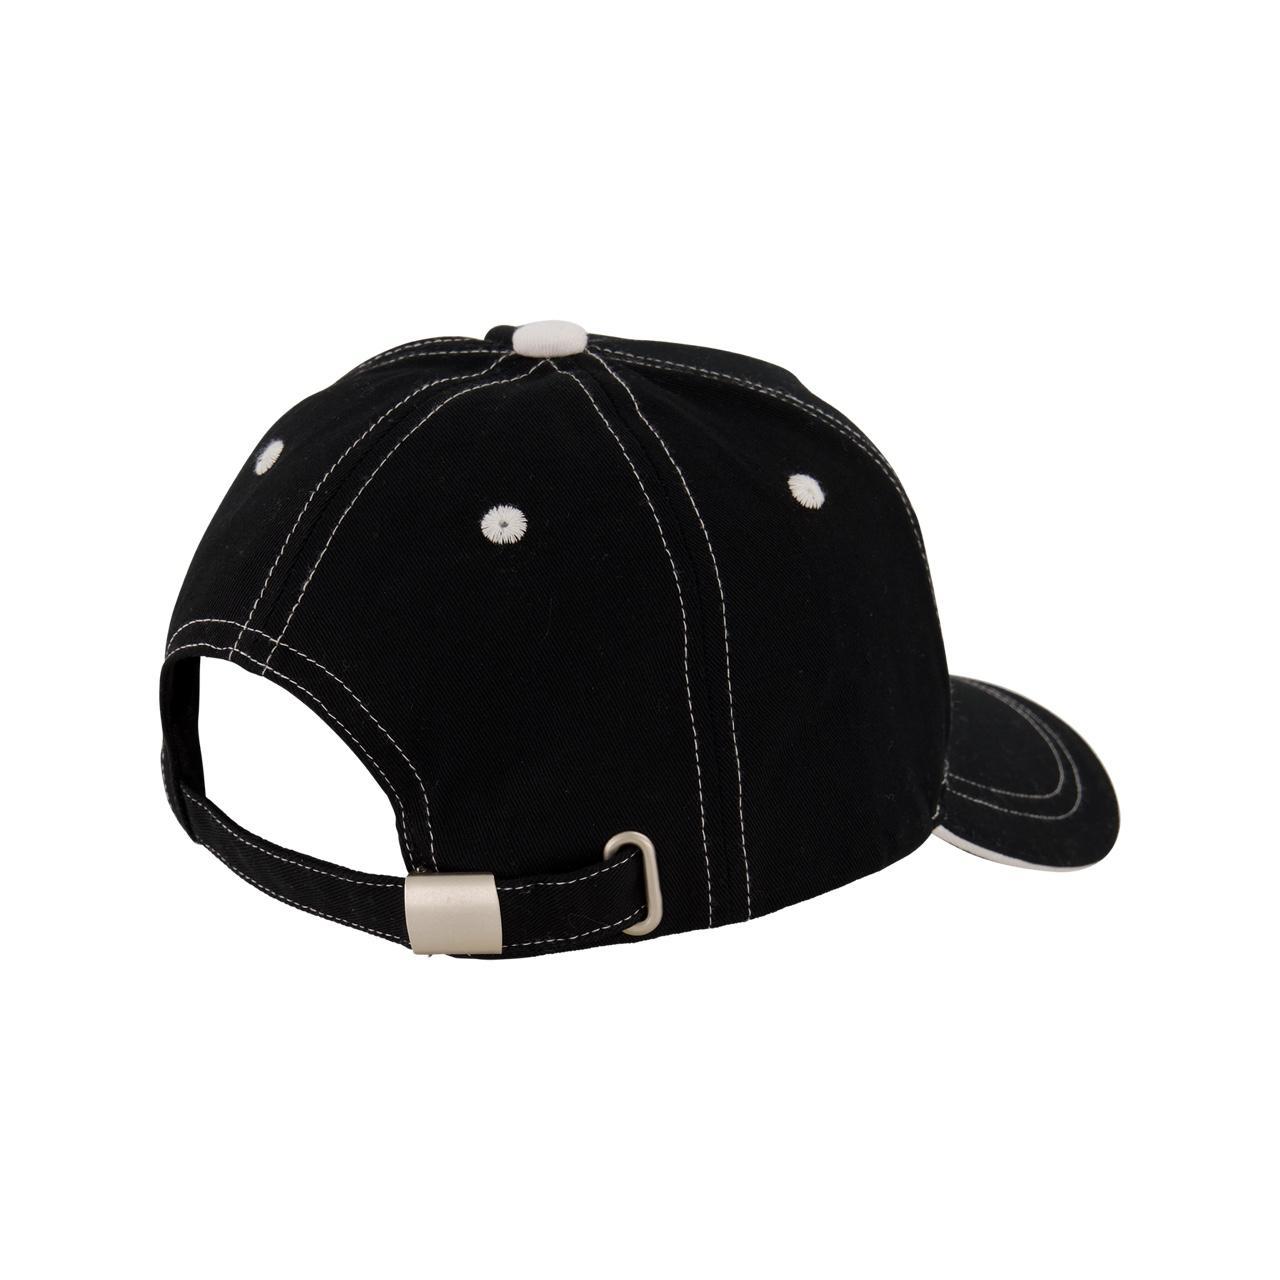 STAY COOL NYC Men's Black and White Hat (4)